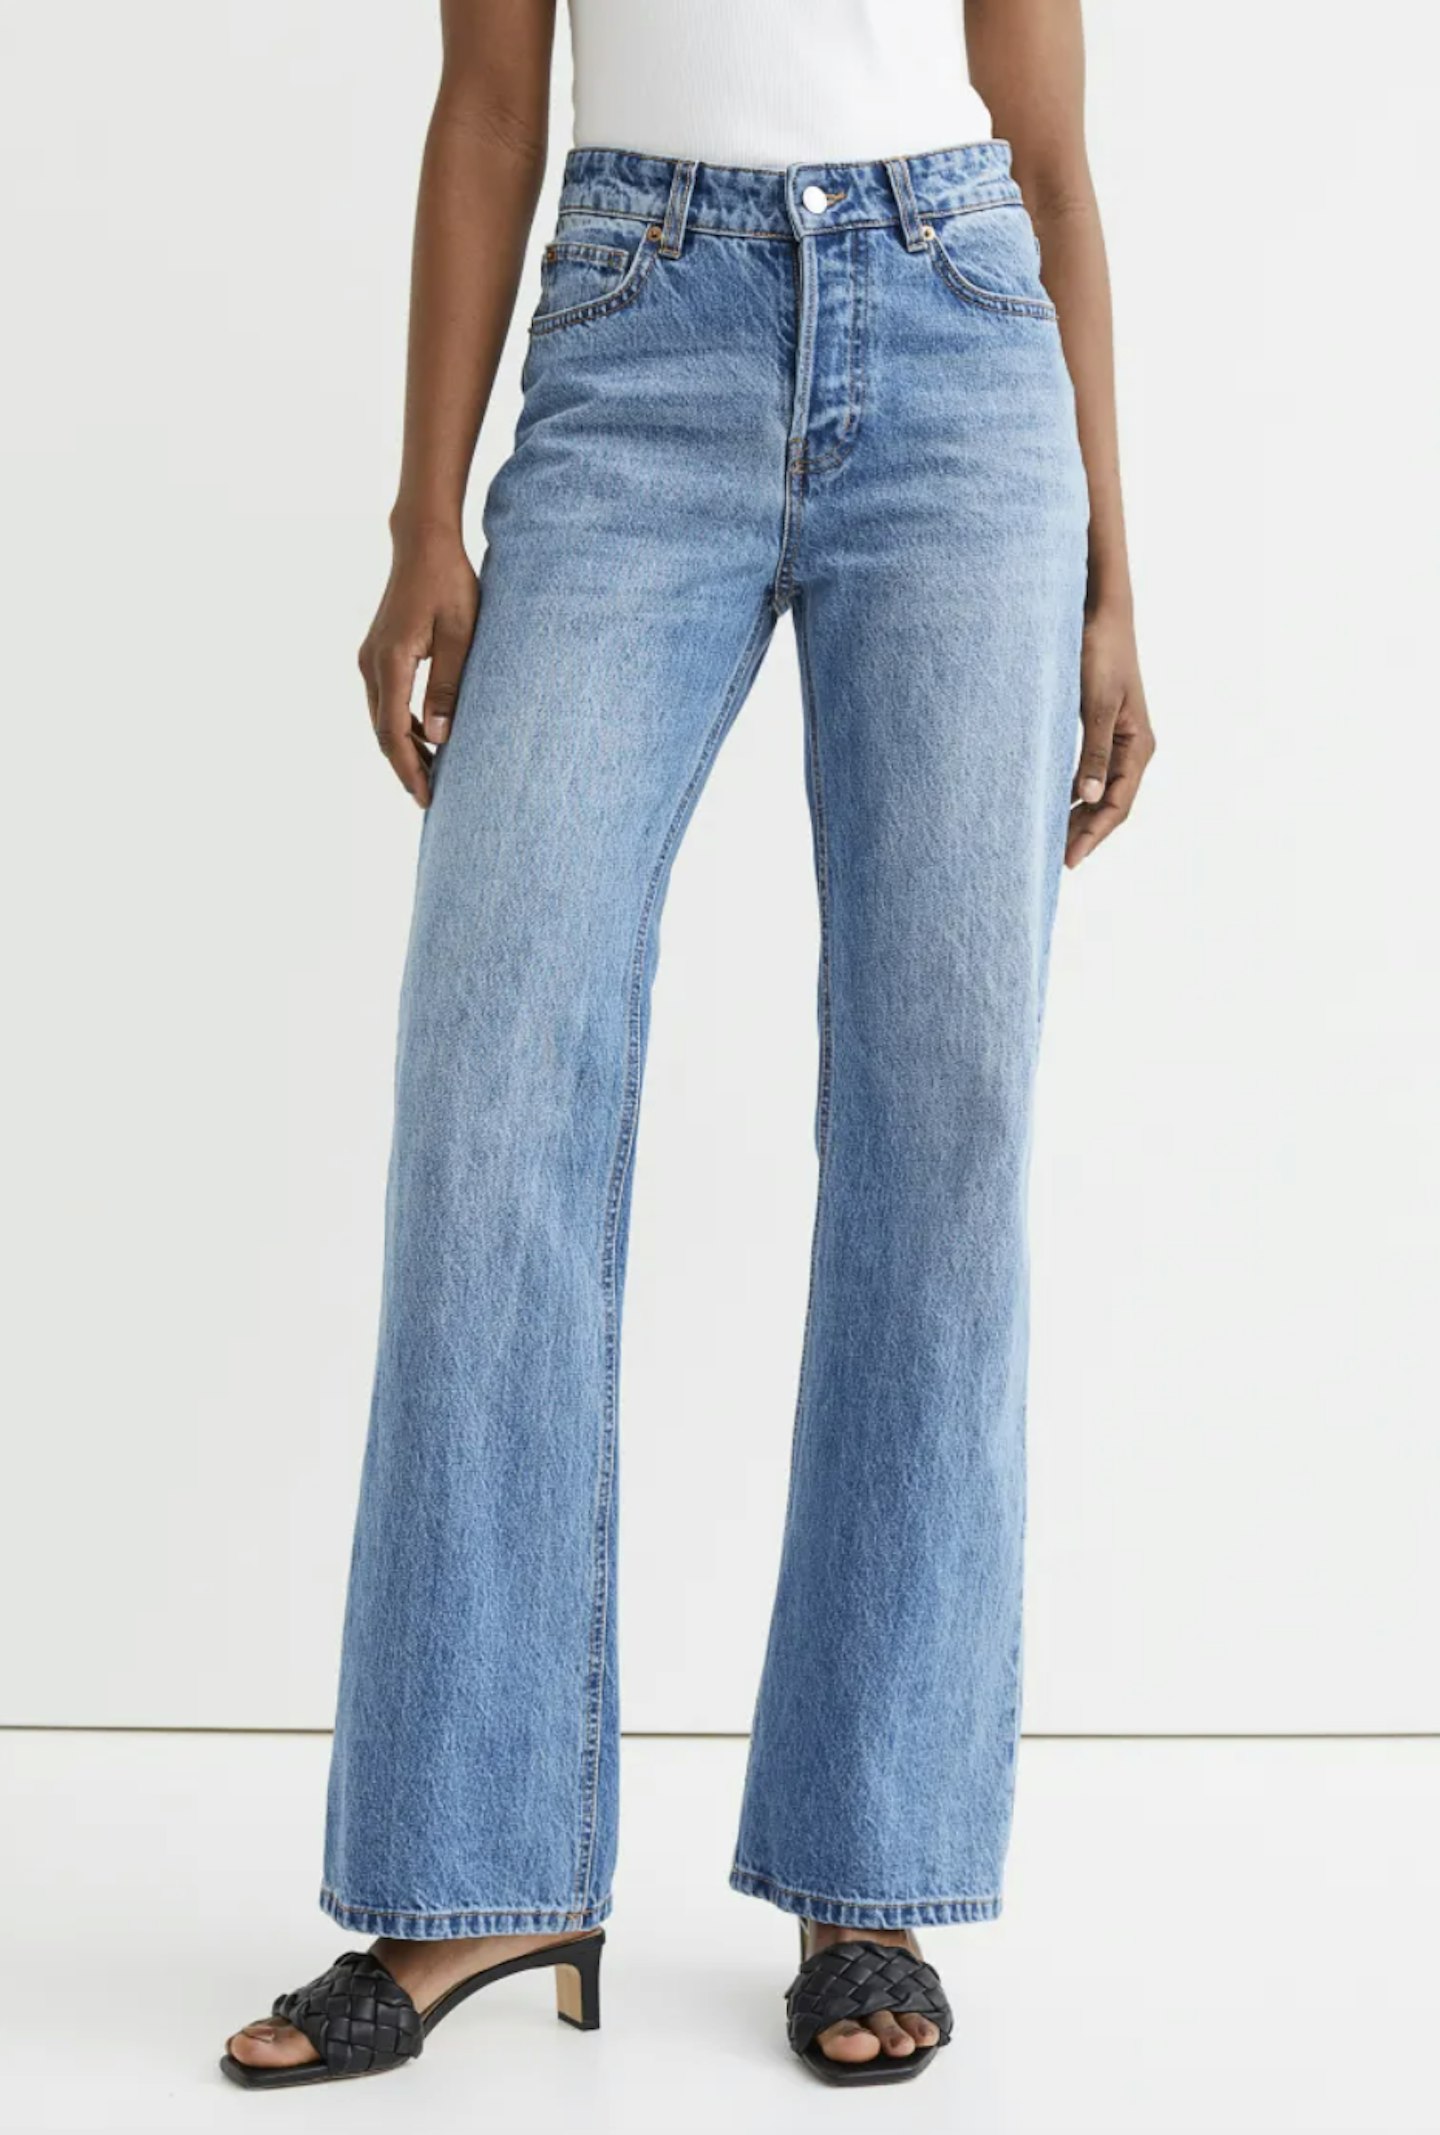 The rumours are true, low-rise jeans are back